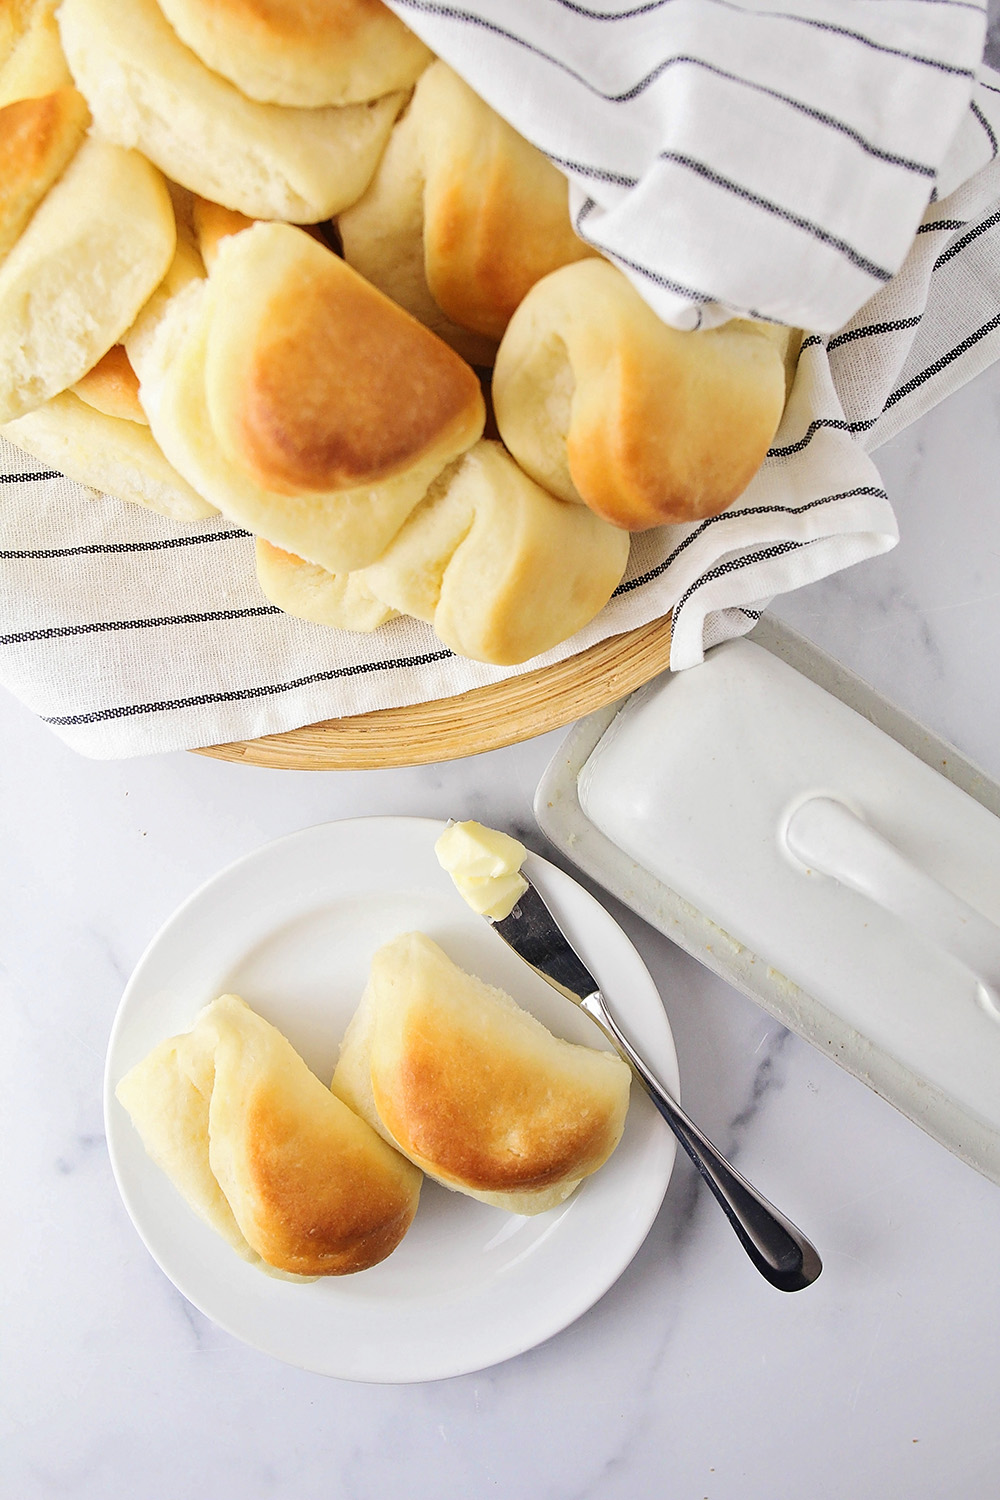 These Parker house rolls are so tender and soft, with the perfect light texture and buttery flavor!